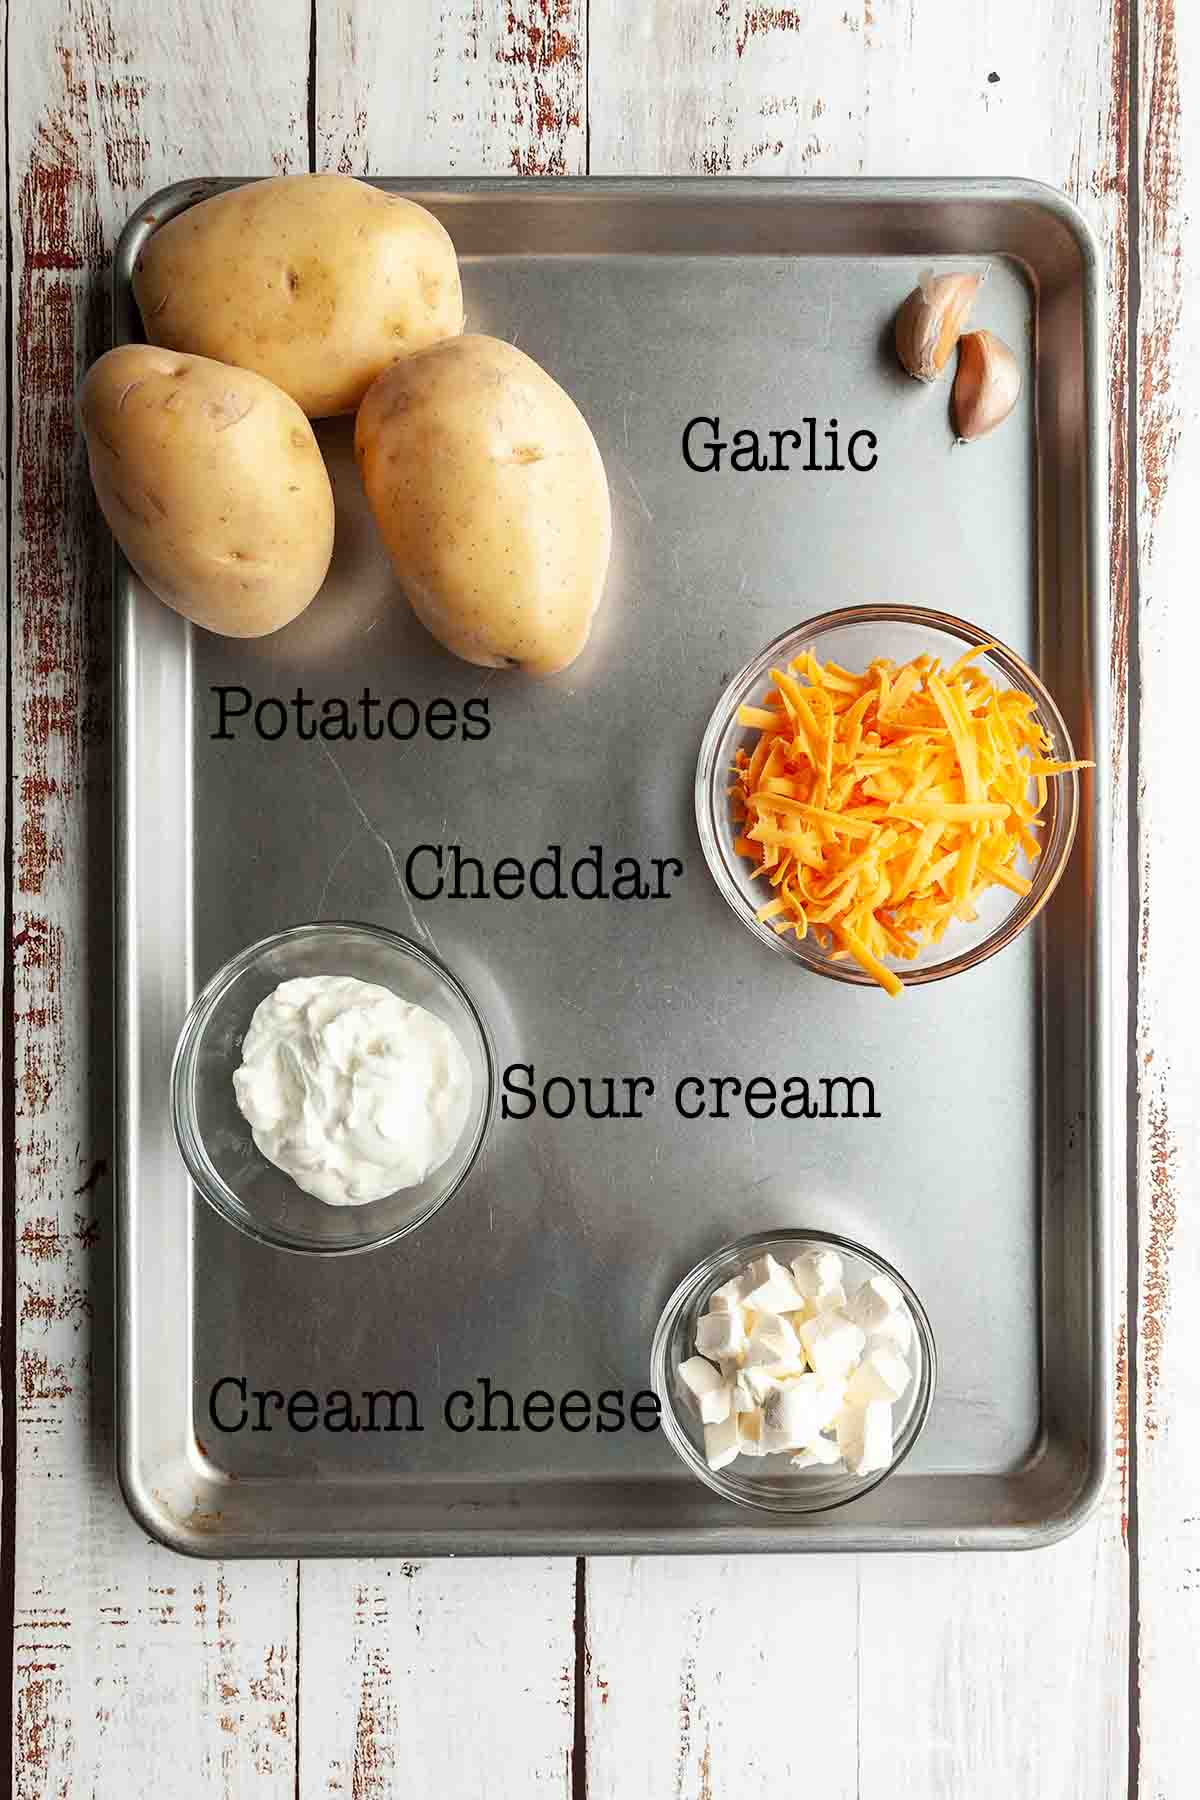 Ingredients for cheesy garlic mashed potatoes--potatoes, garlic, cheddar, sour cream, and cream cheese